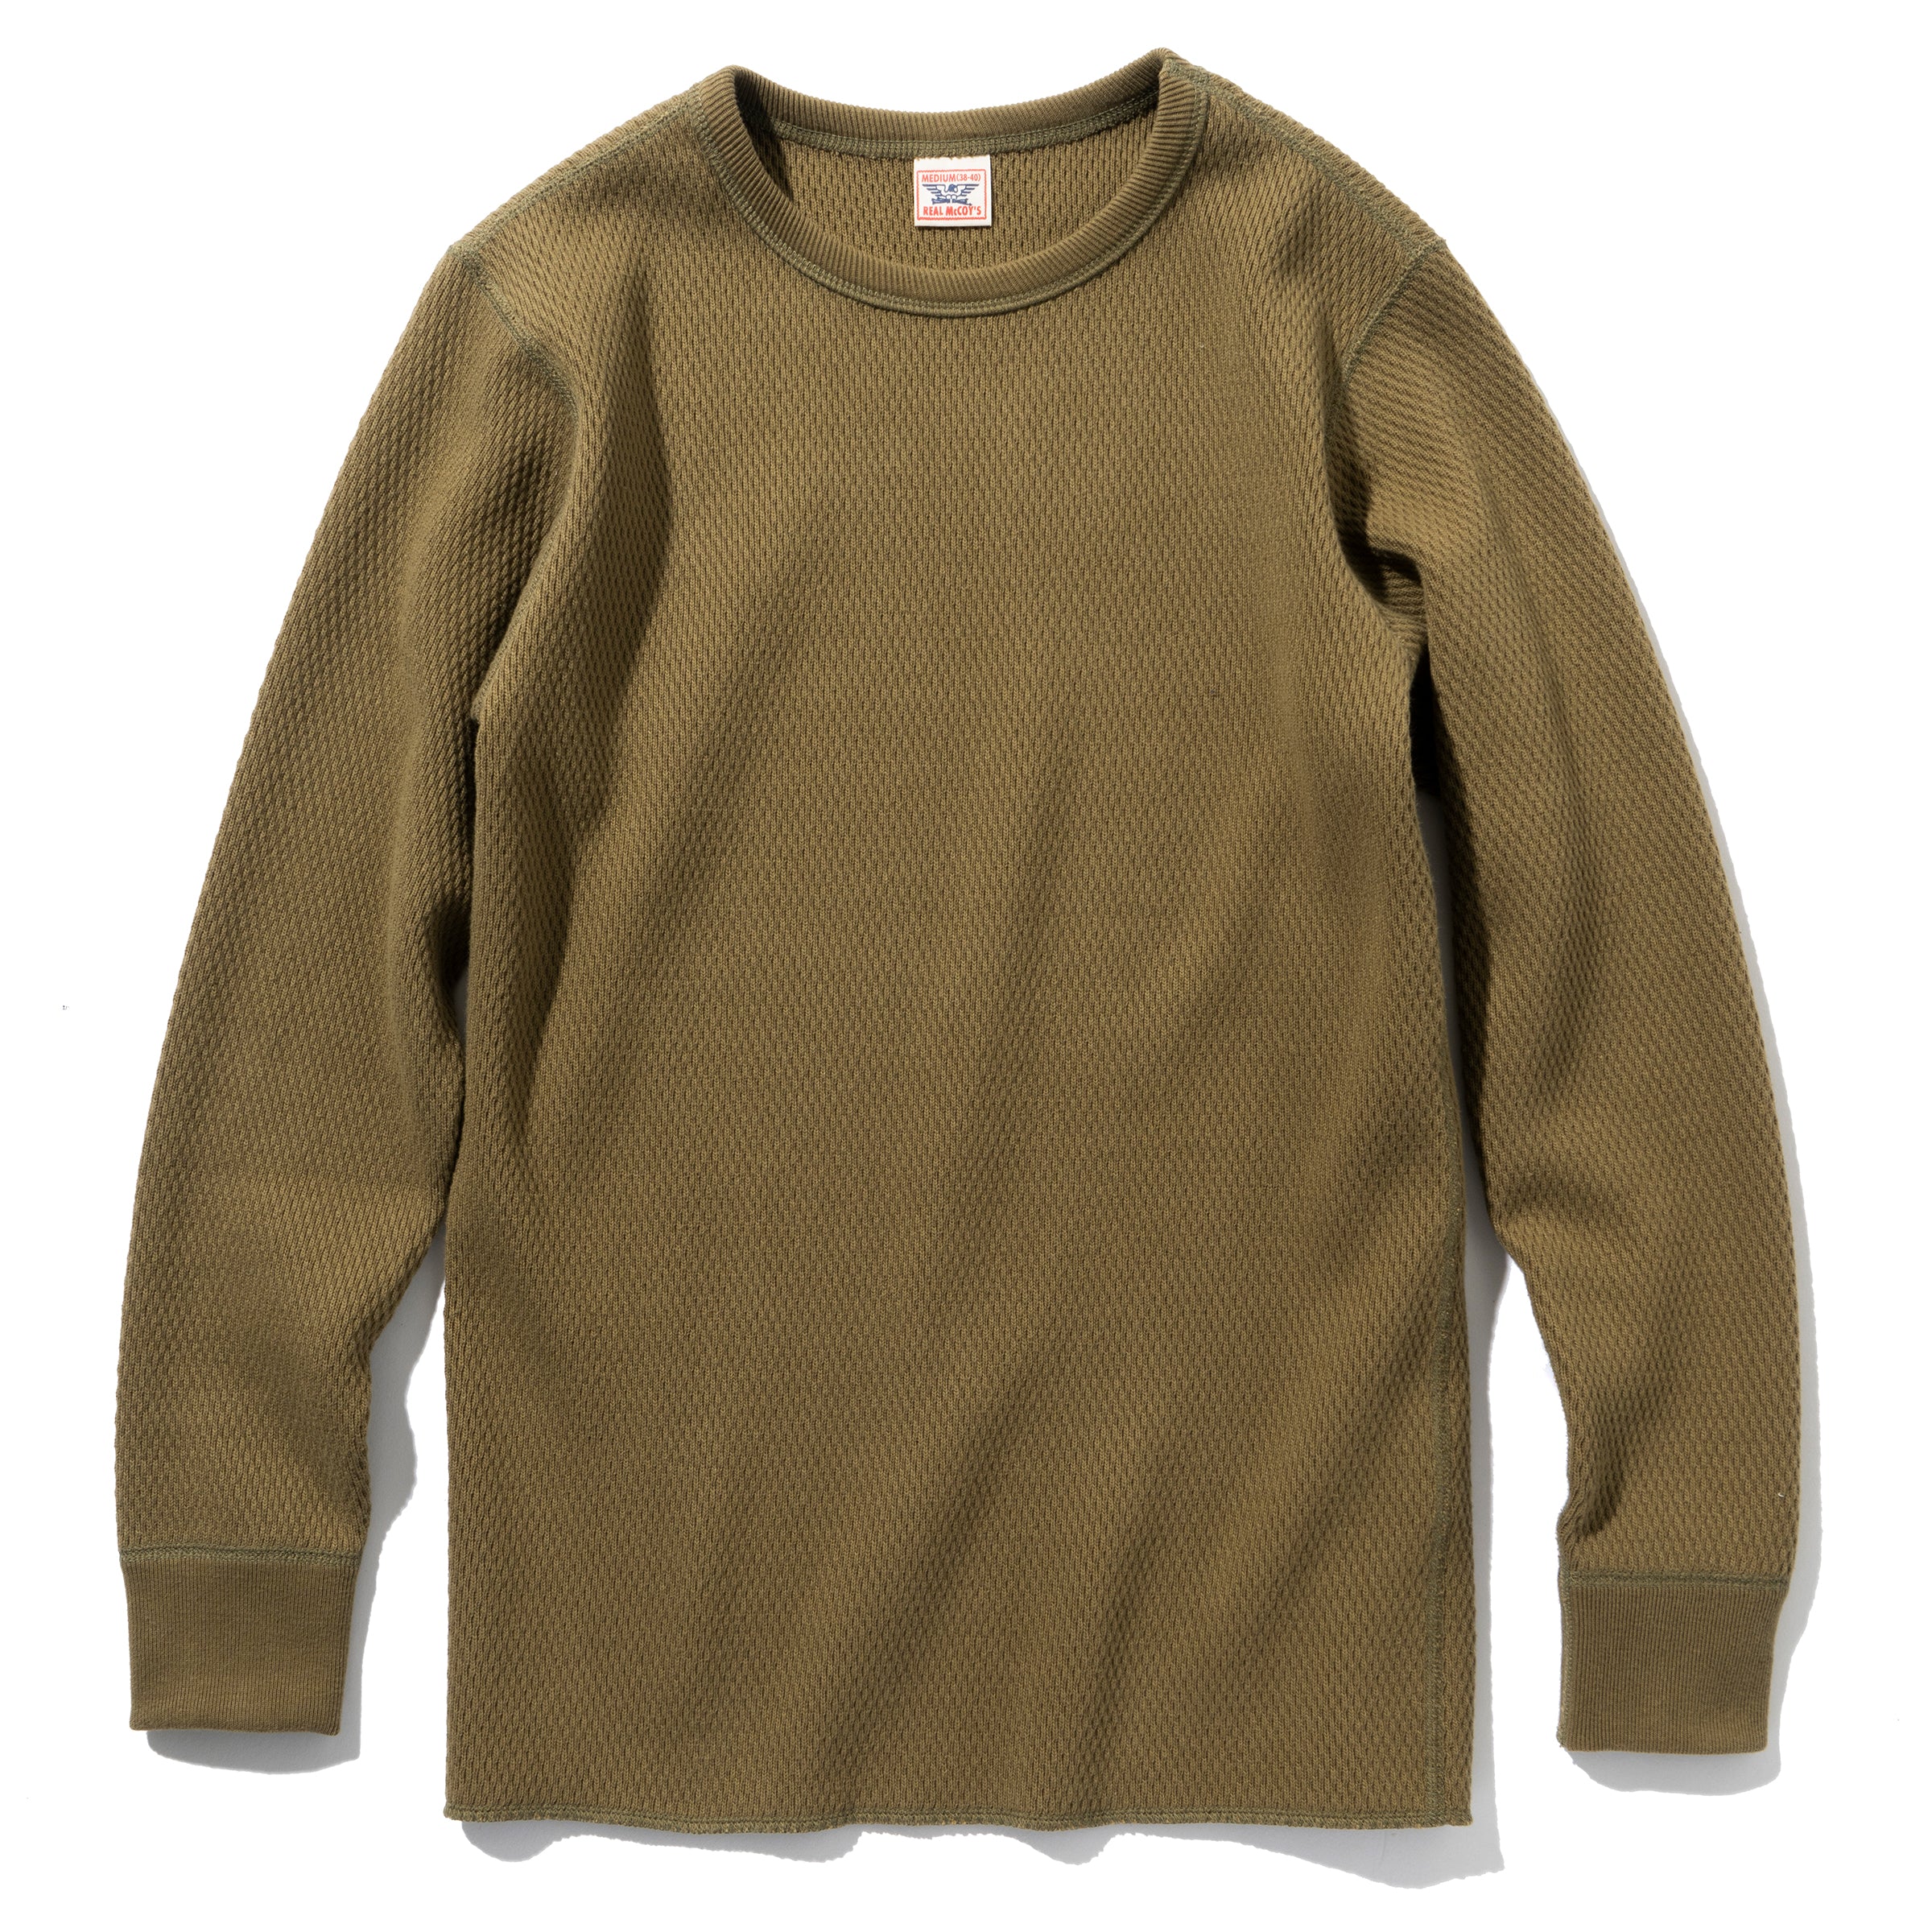 MILITARY THERMAL SHIRT – The Real McCoy's